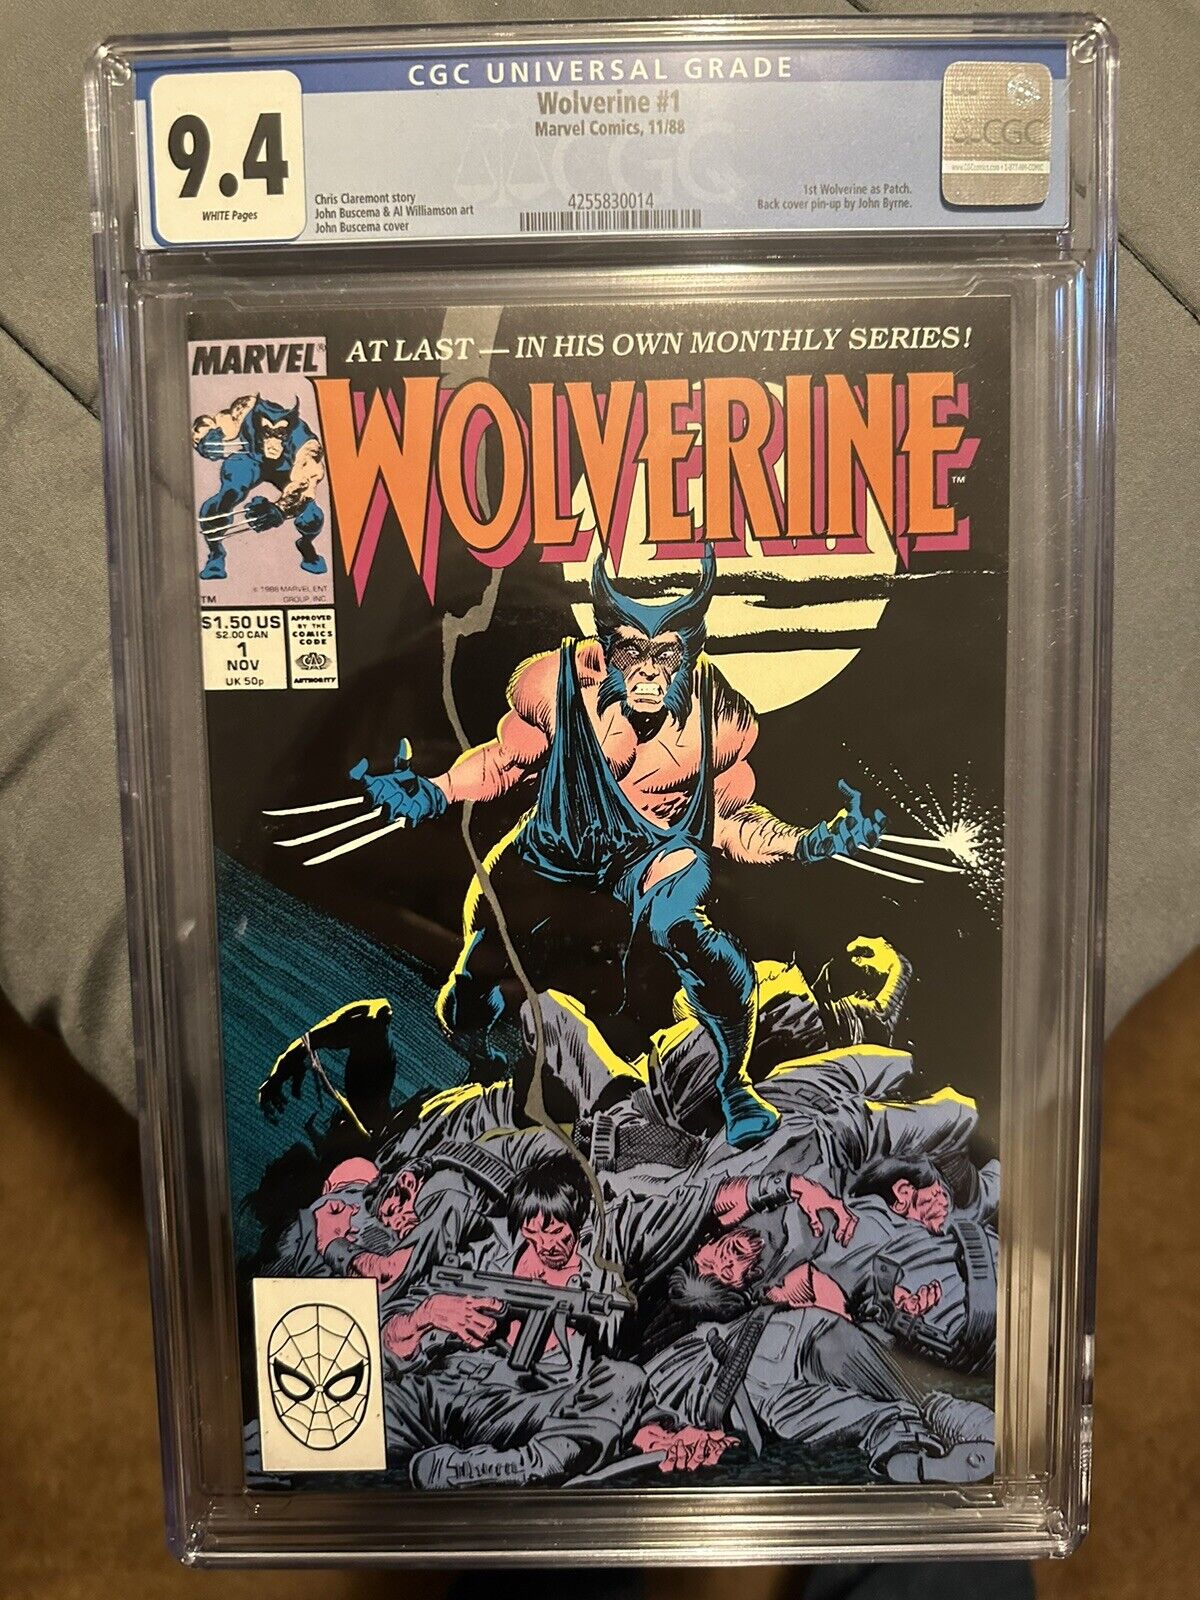 Wolverine #1 CGC 9.4 White Pages (Marvel 1988) 1st App of Wolverine as Patch